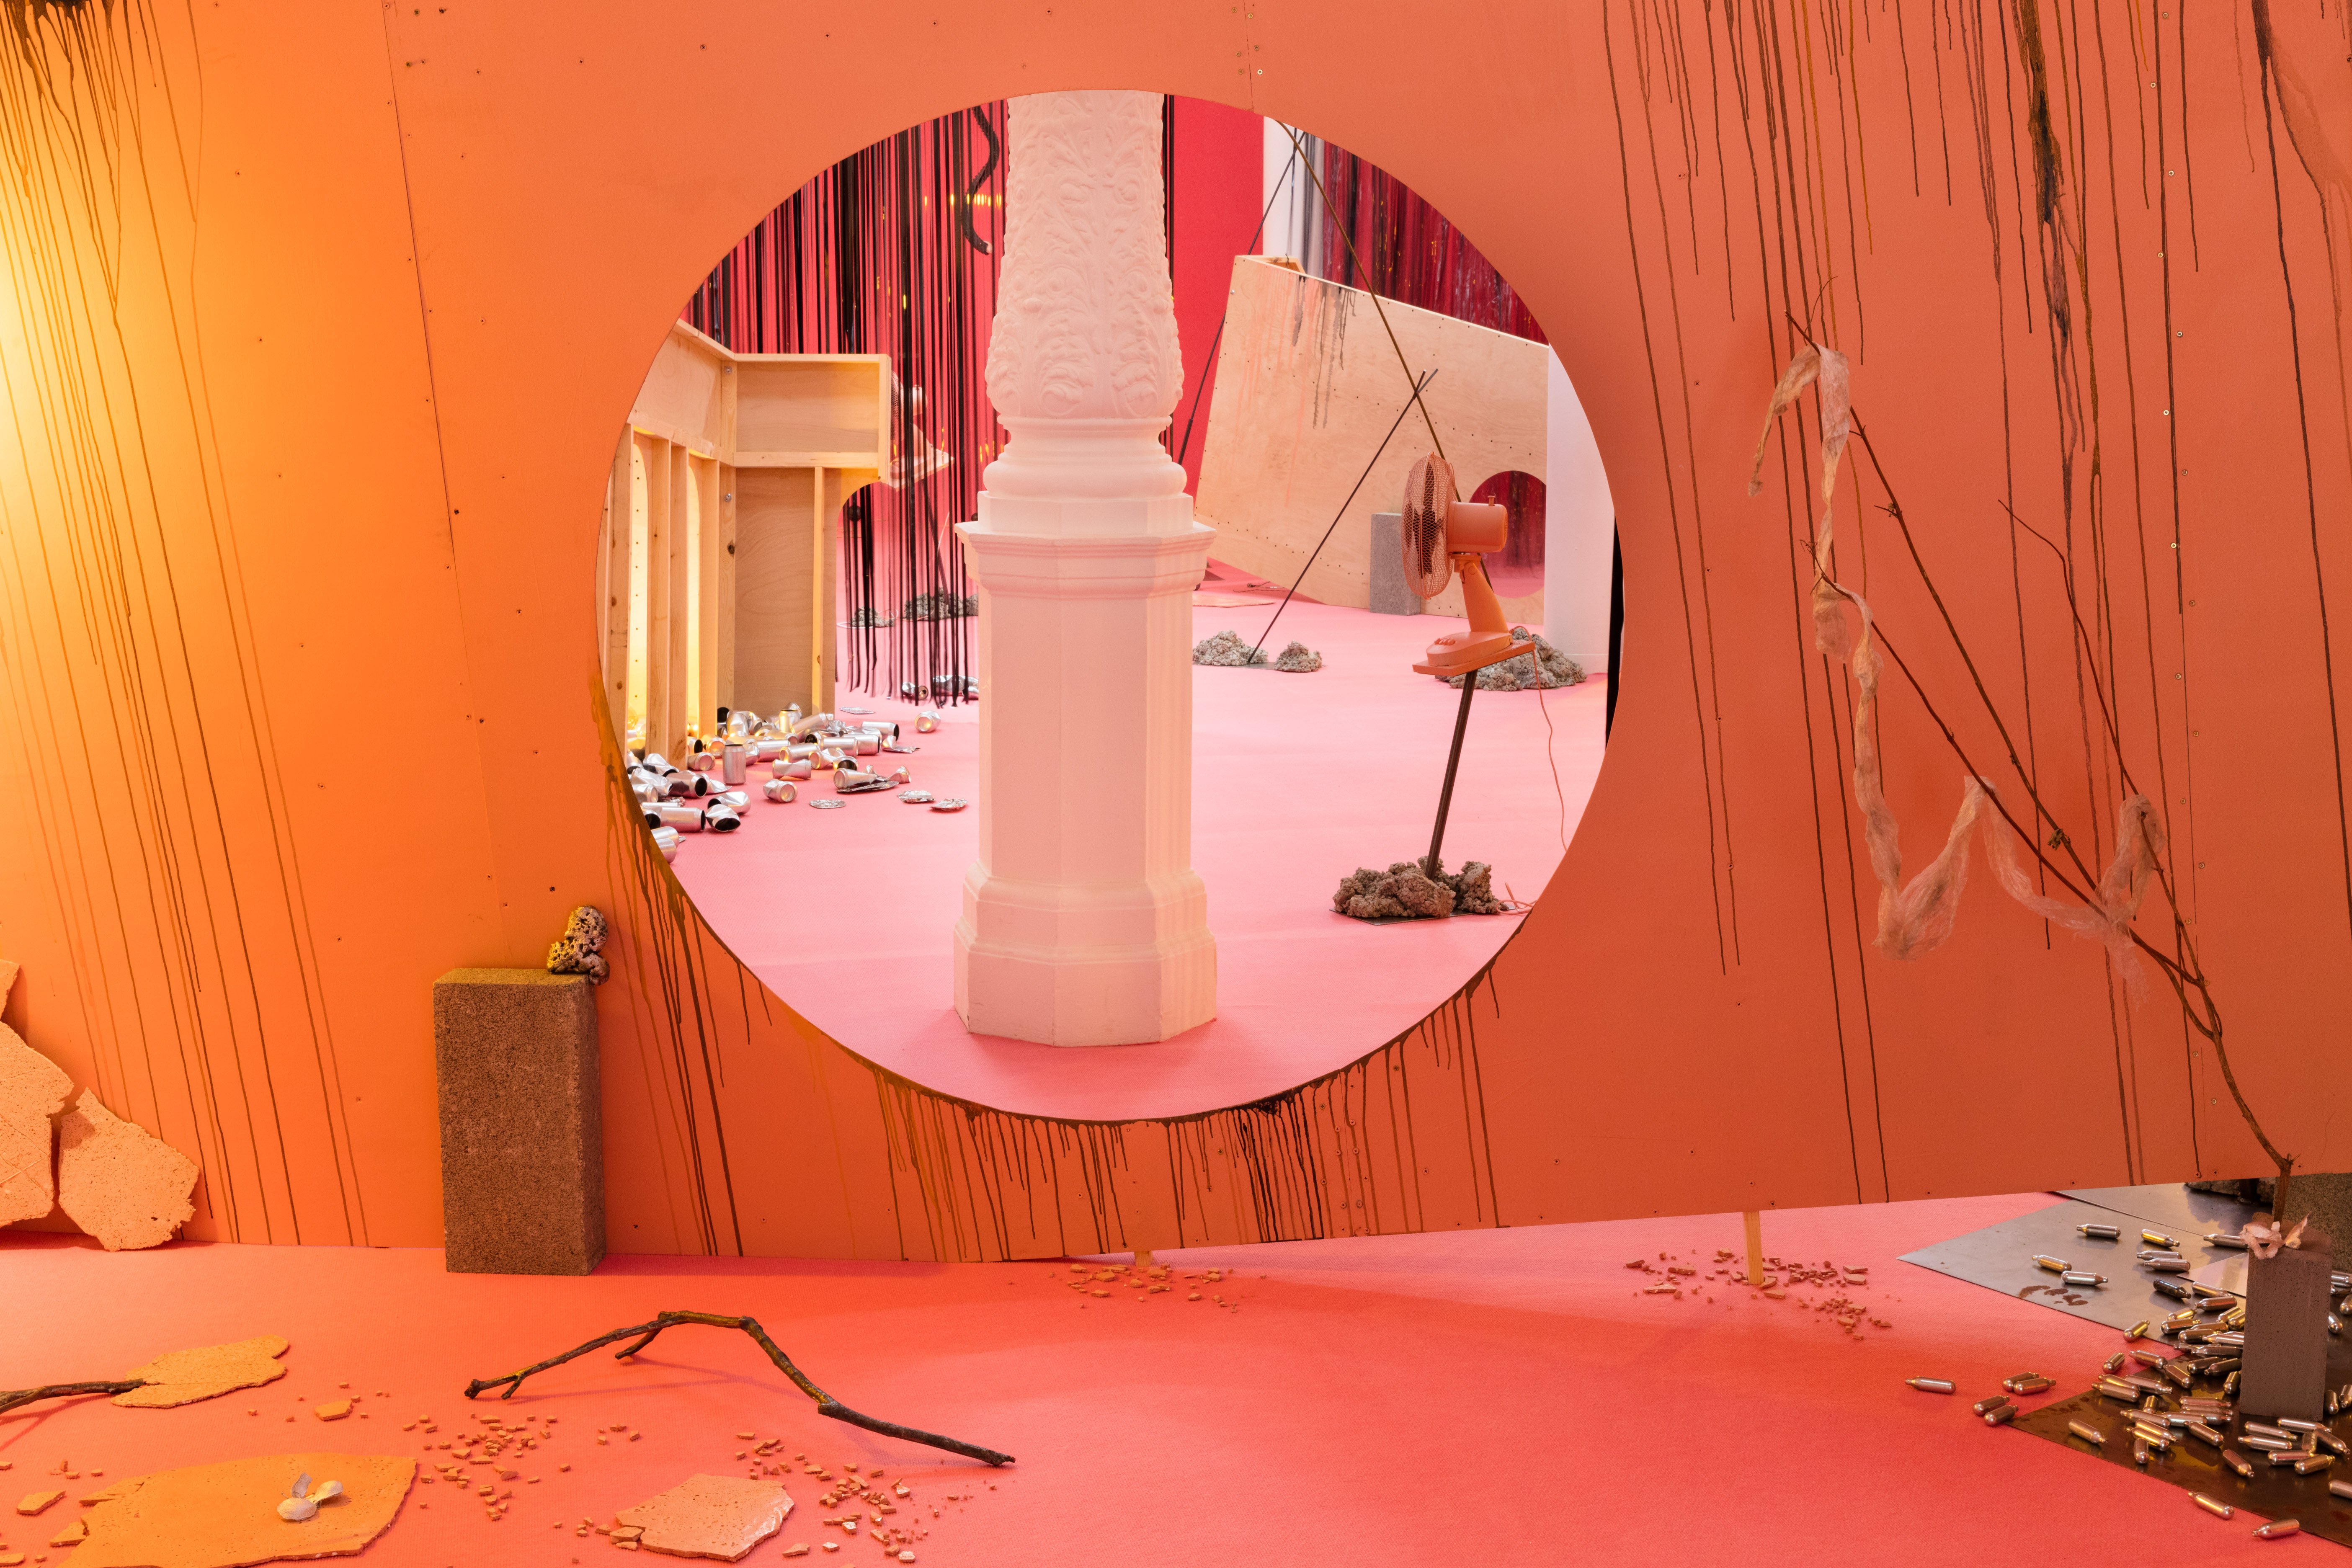 A room suffused with orange and peach light. In a circle, a view of a pillar is visible. Several objects such as a twig are visible resting on the floor.